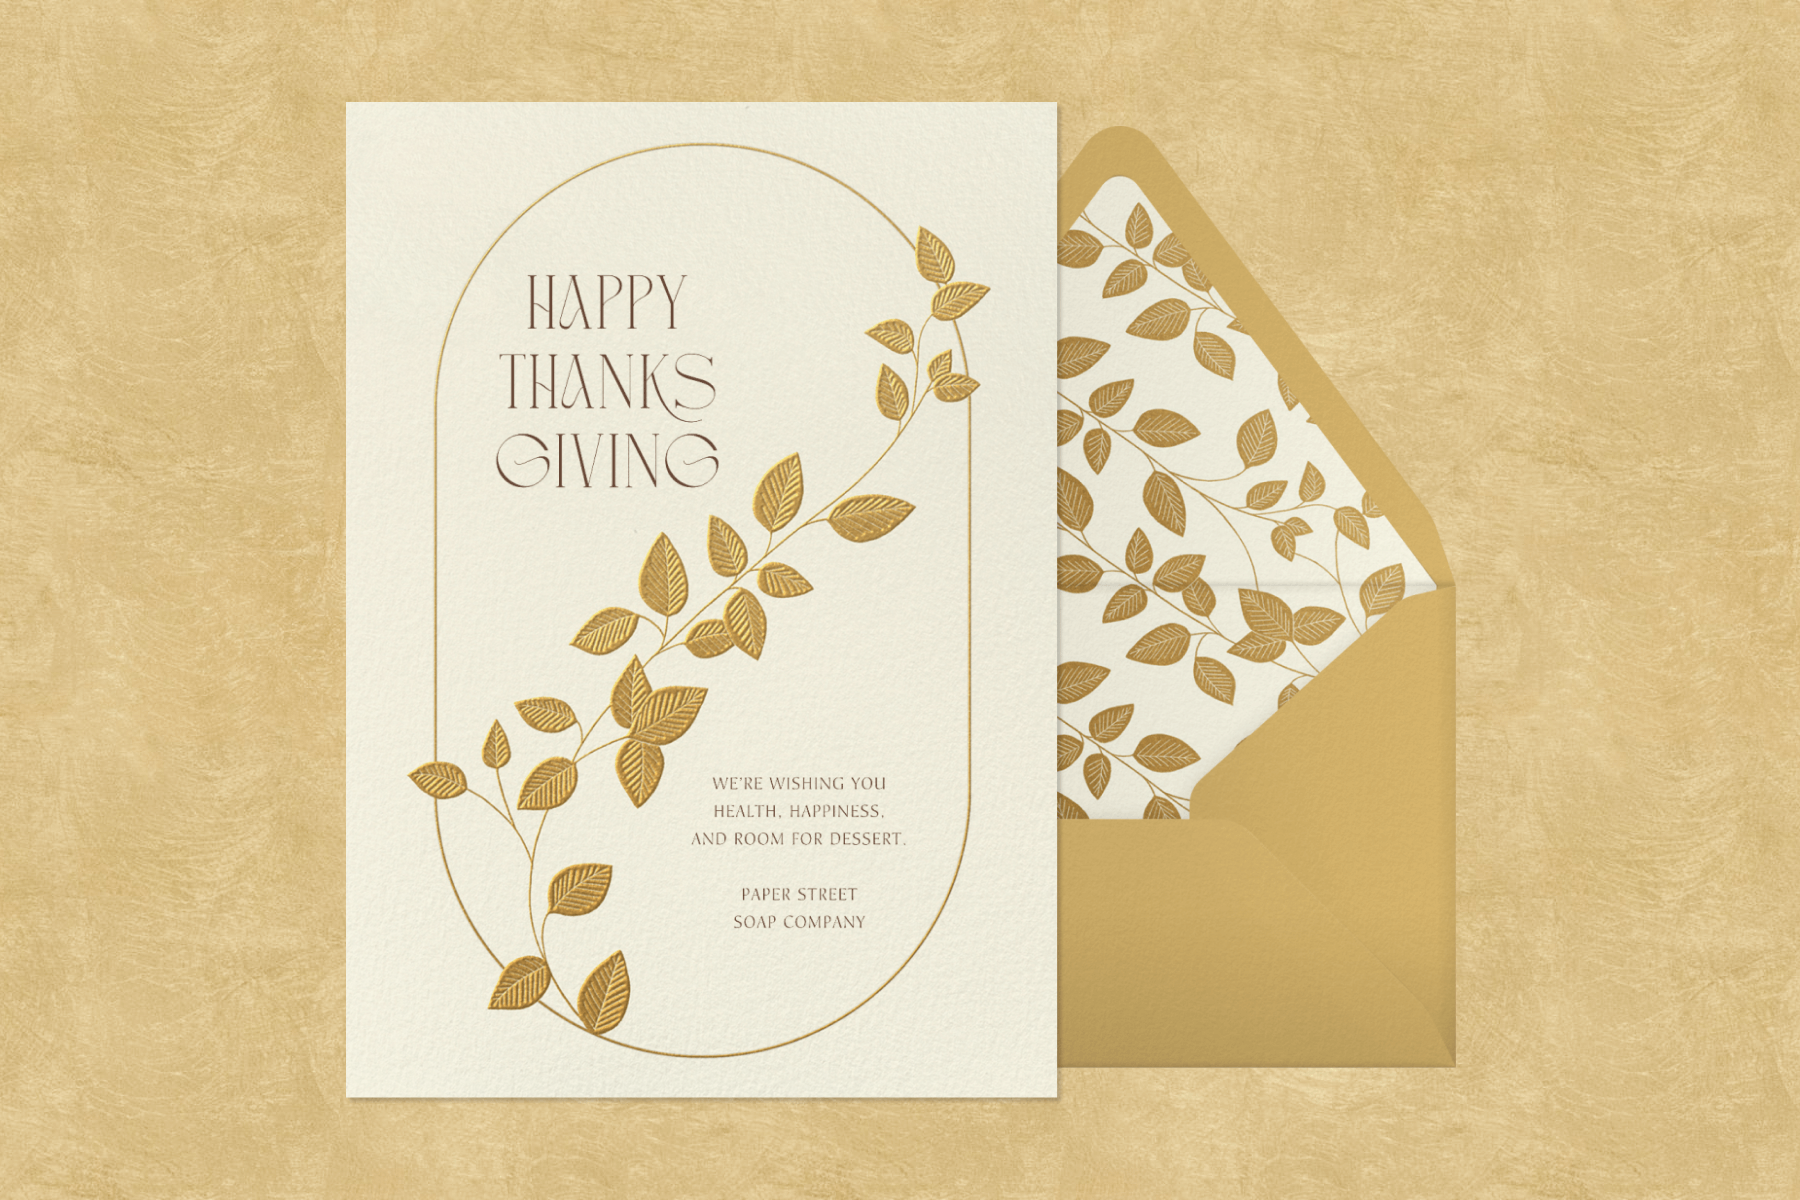 A Thanksgiving card with the words “Happy Thanksgiving” and an illustration of a framed golden vine.